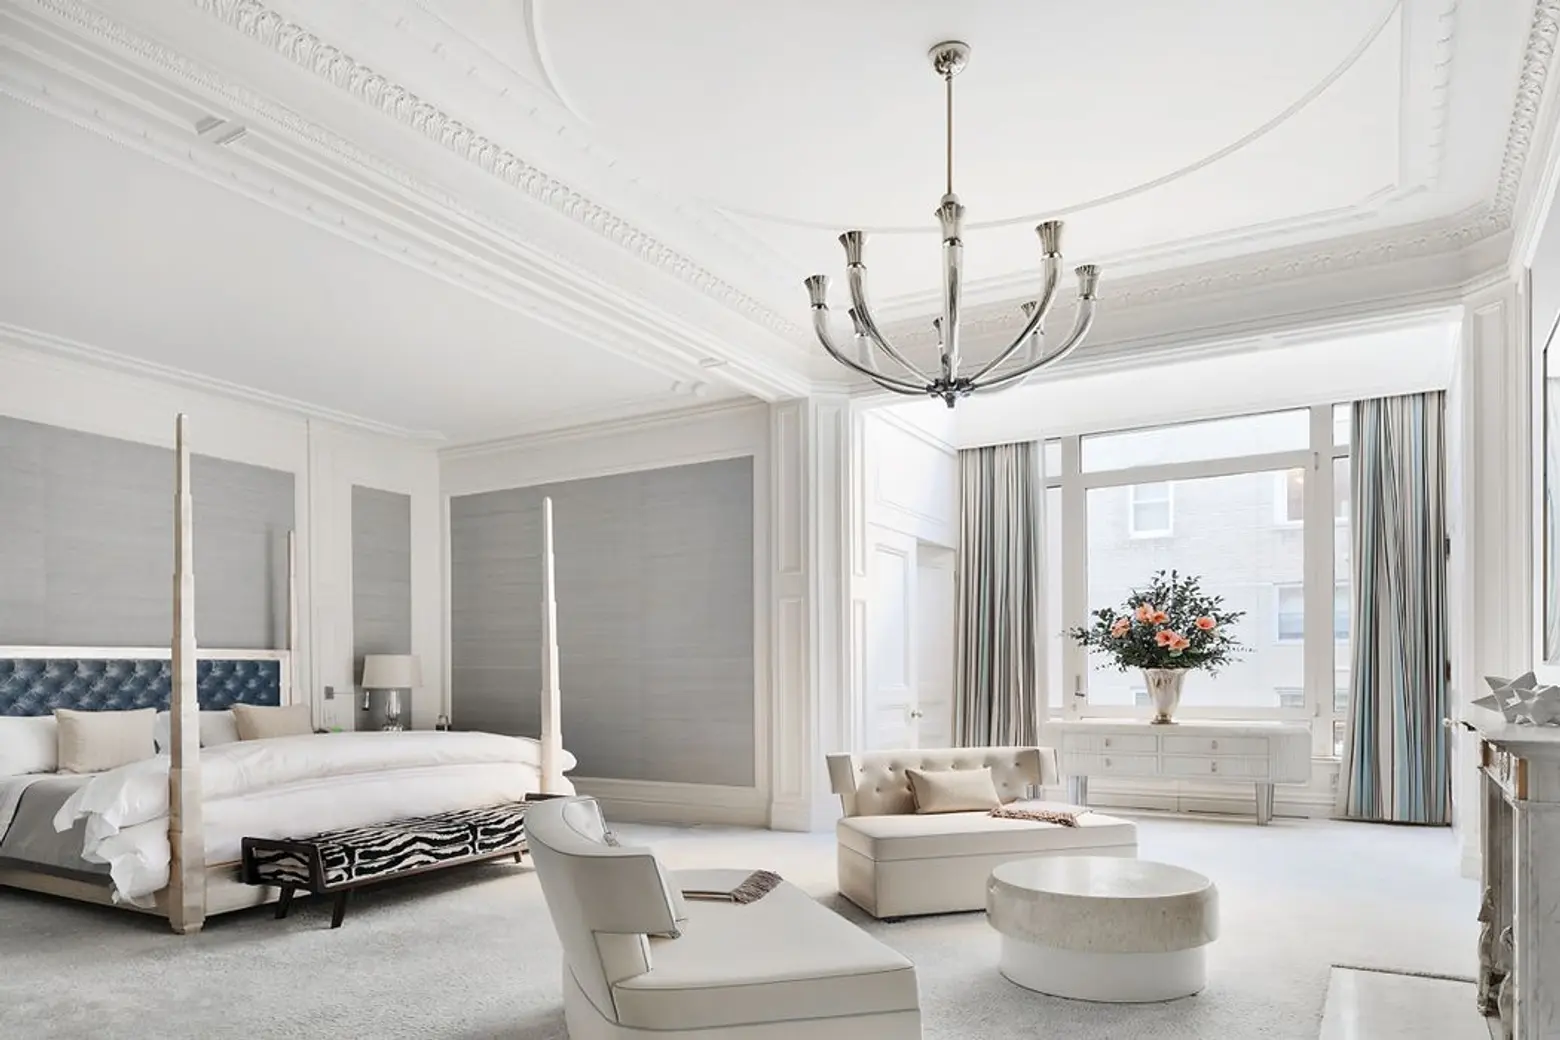 11 East 82nd Street, upper east side, mansions, townhouses, celebrities, cool listings